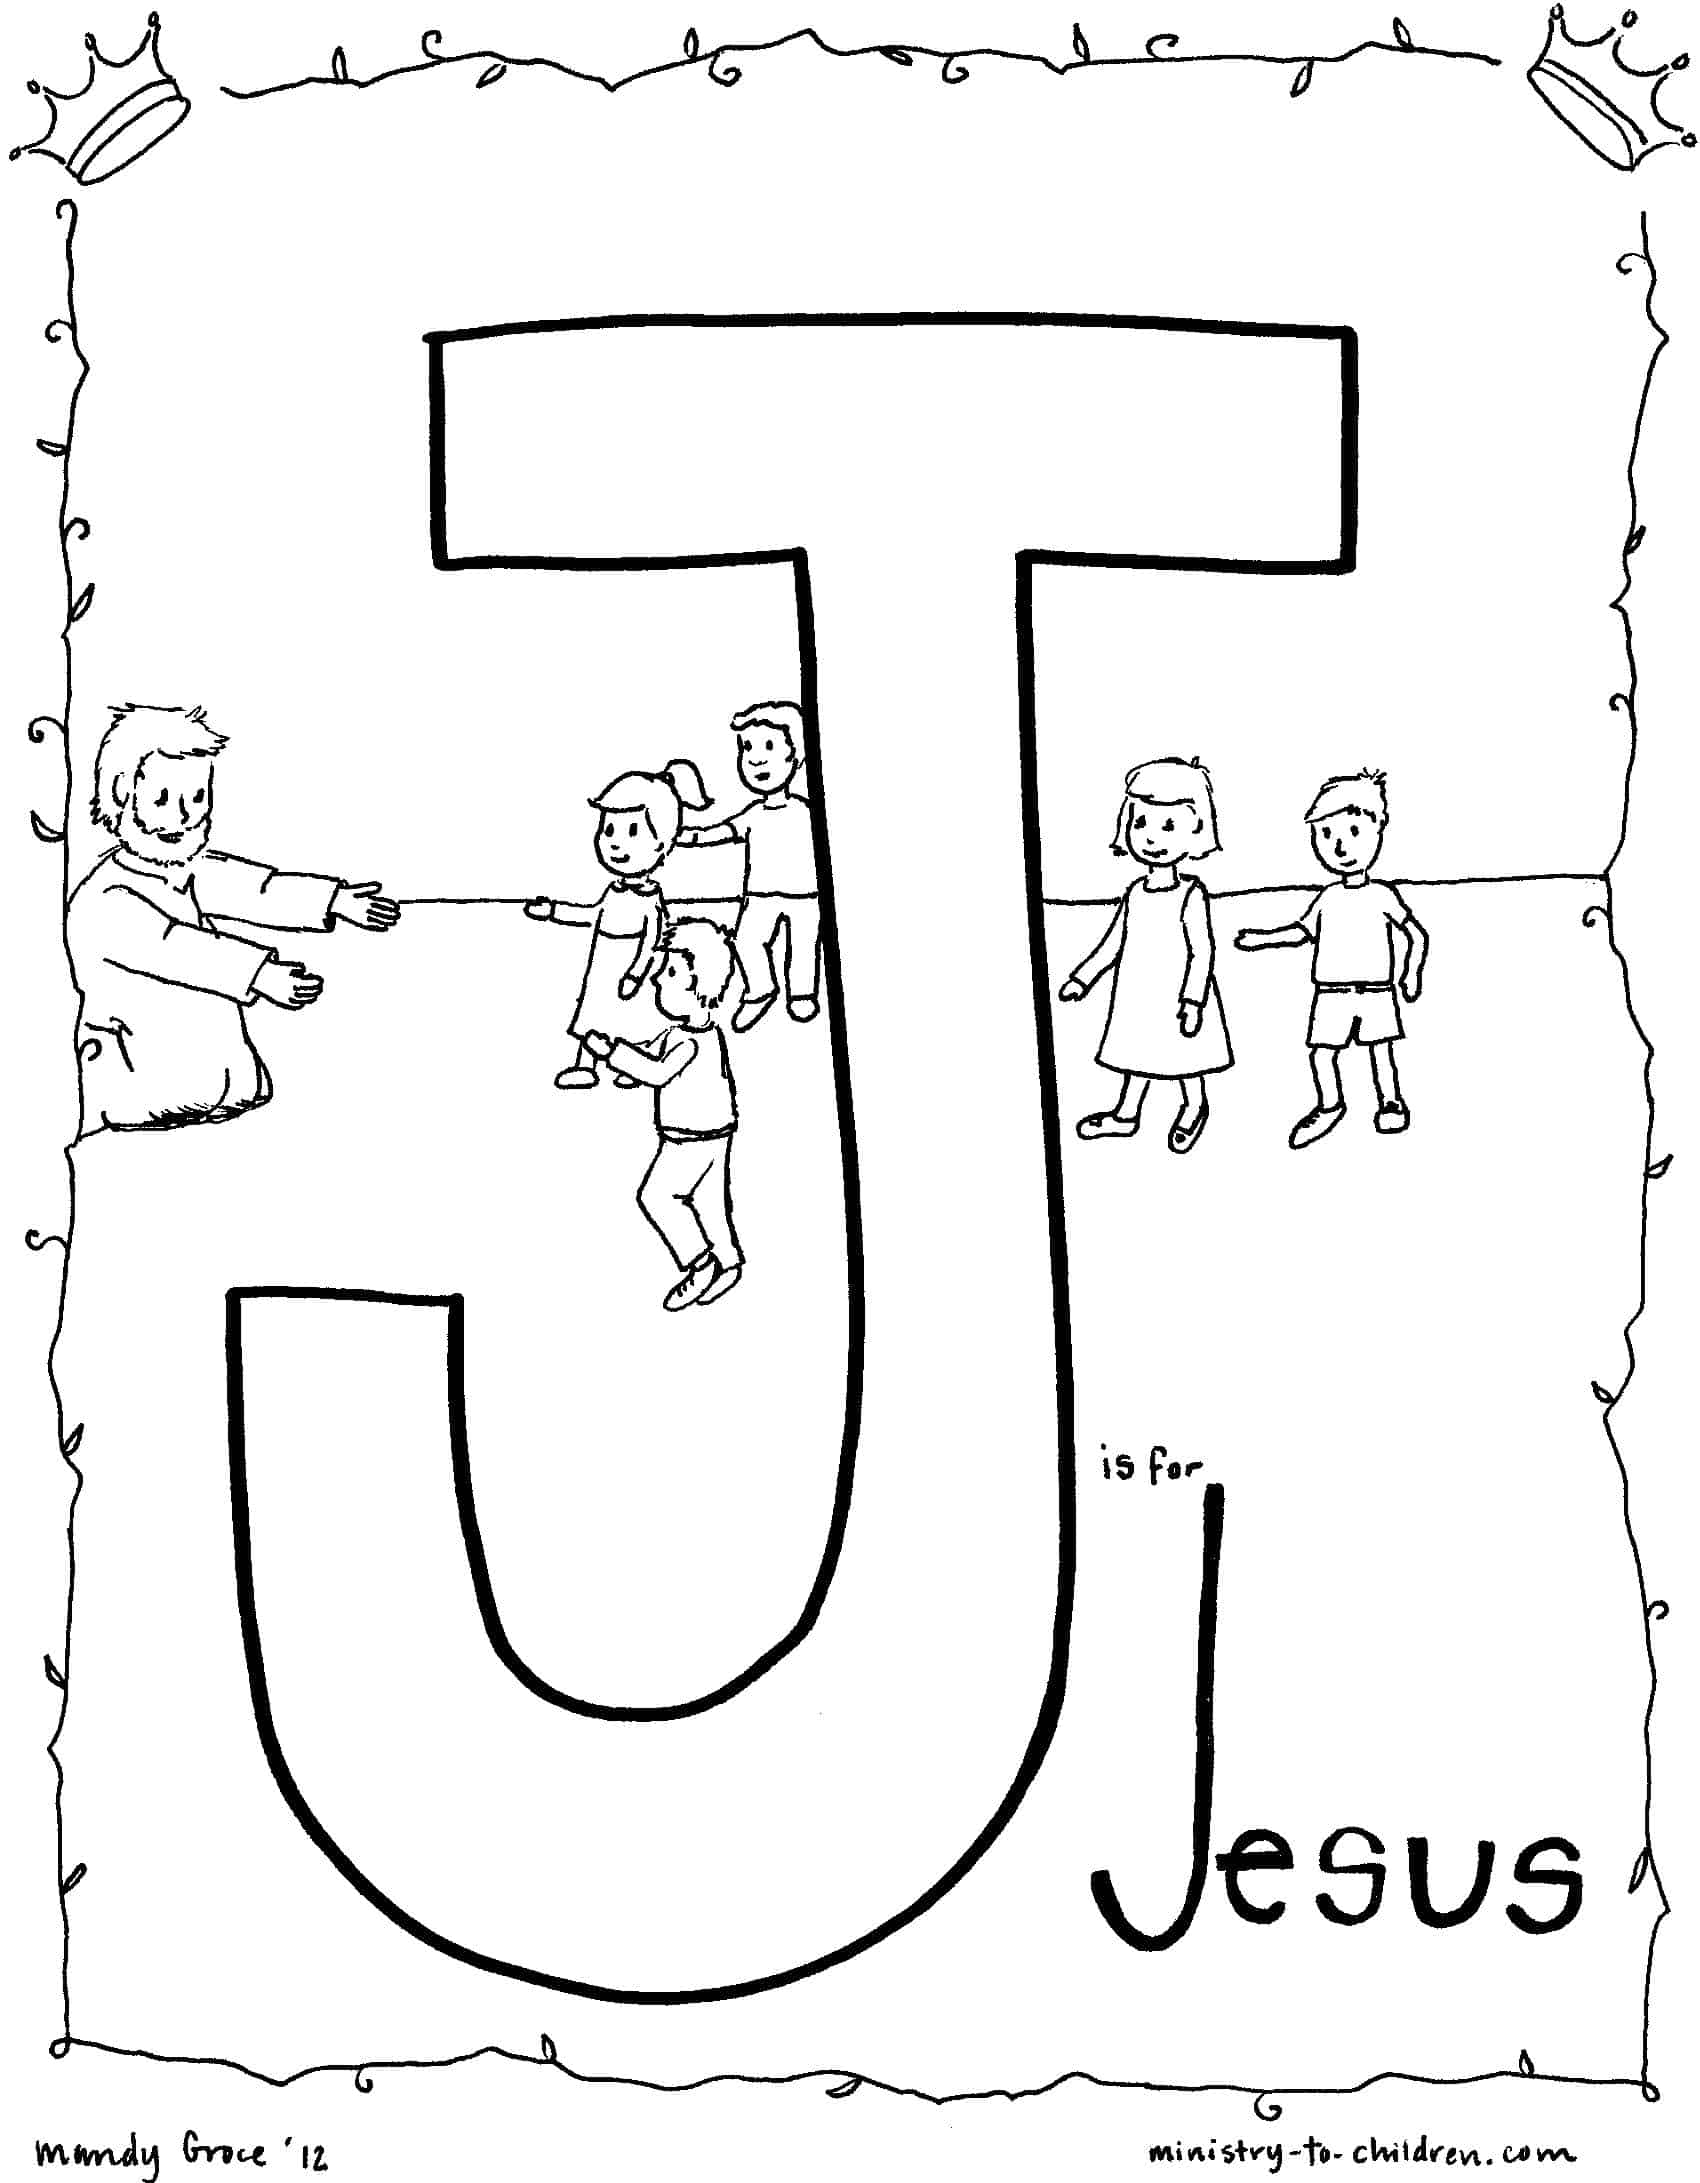 J is for JESUS - Bible Alphabet Coloring Page